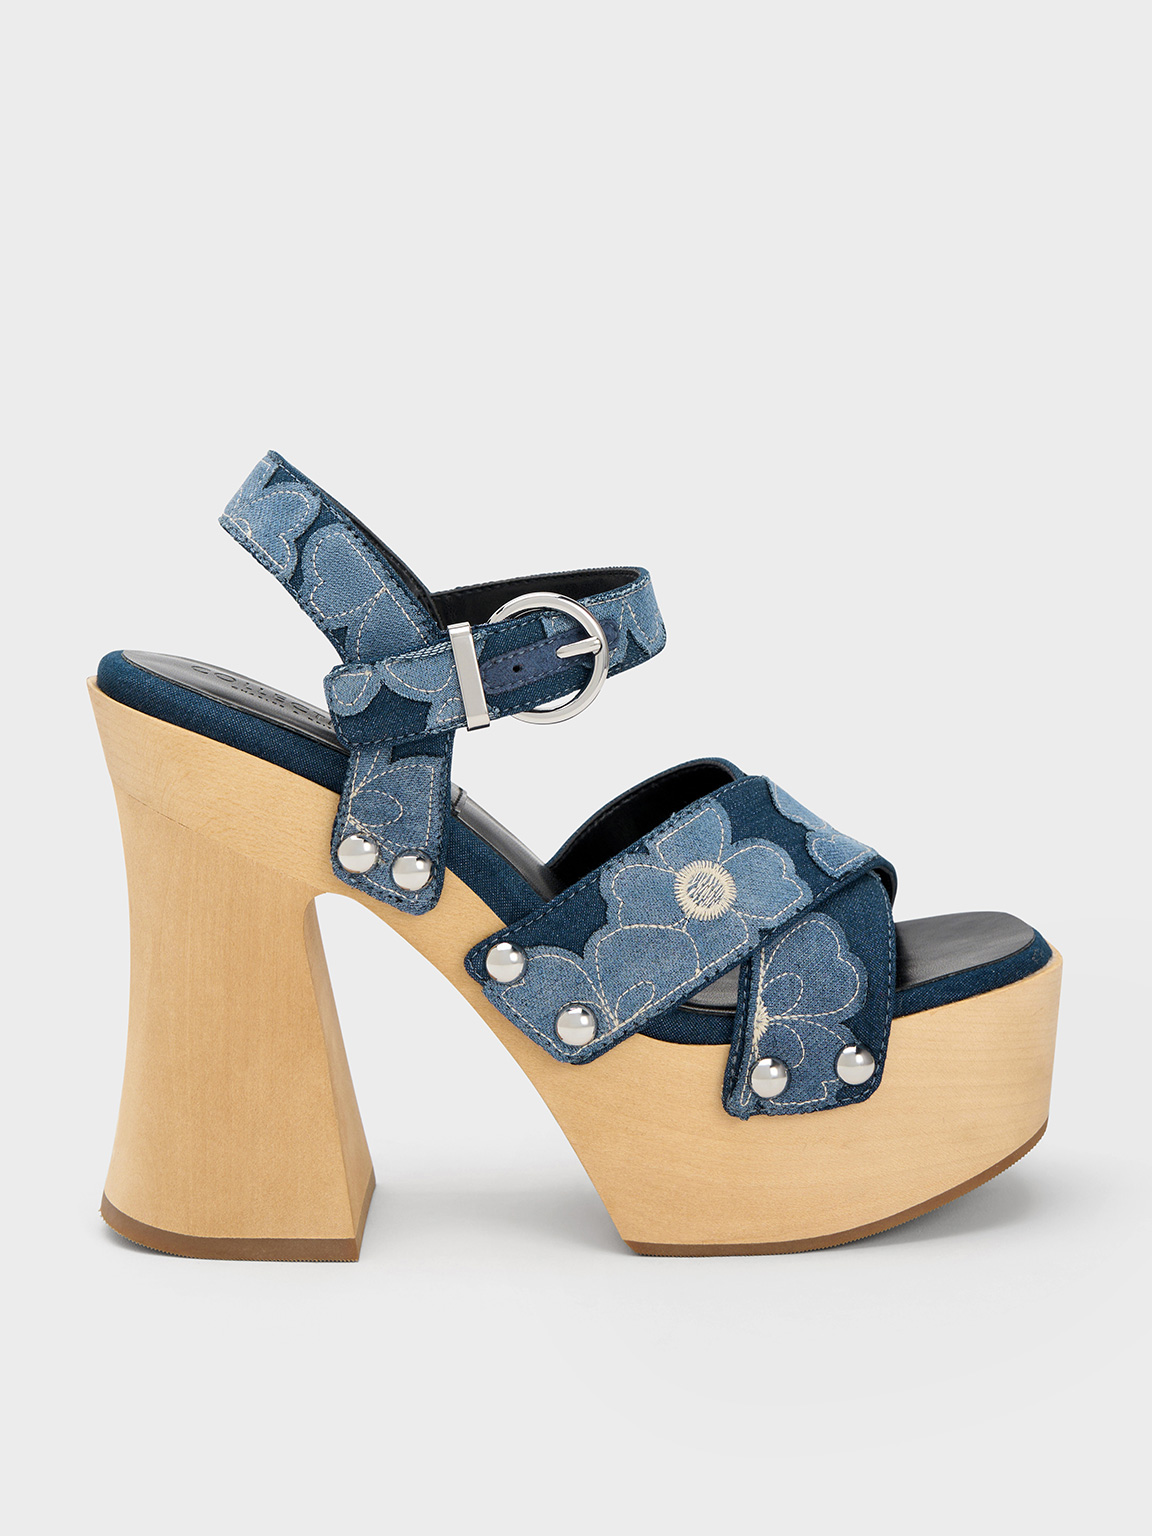 Charles & Keith Tabitha Floral Denim Crossover Sandals In Blue